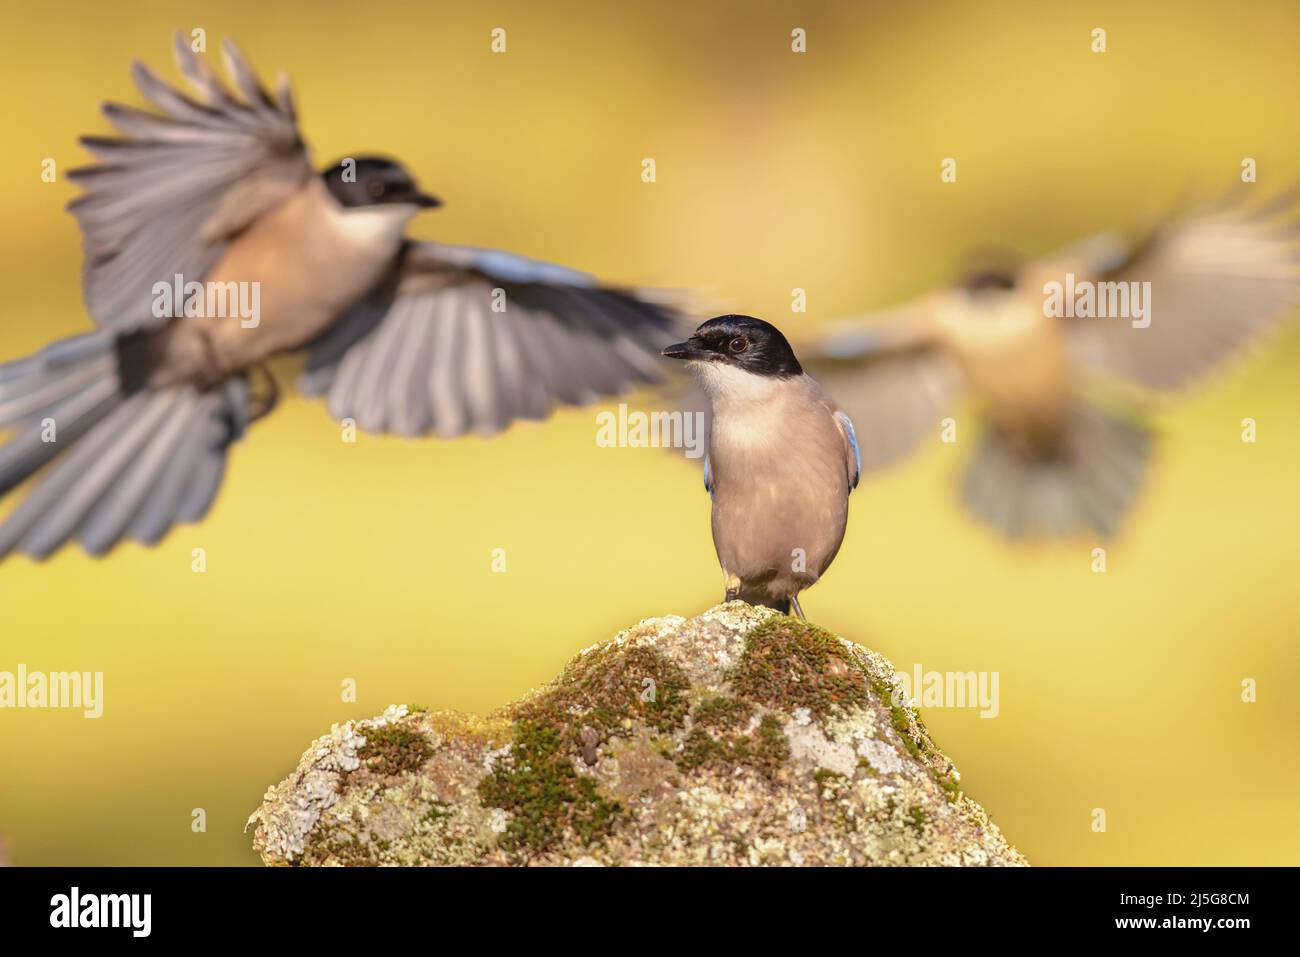 Iberian magpie (Cyanopica cooki) is a bird in the crow family. Bird flying against bright background in Extremadura, Spain. Wildlife scene of nature i Stock Photo